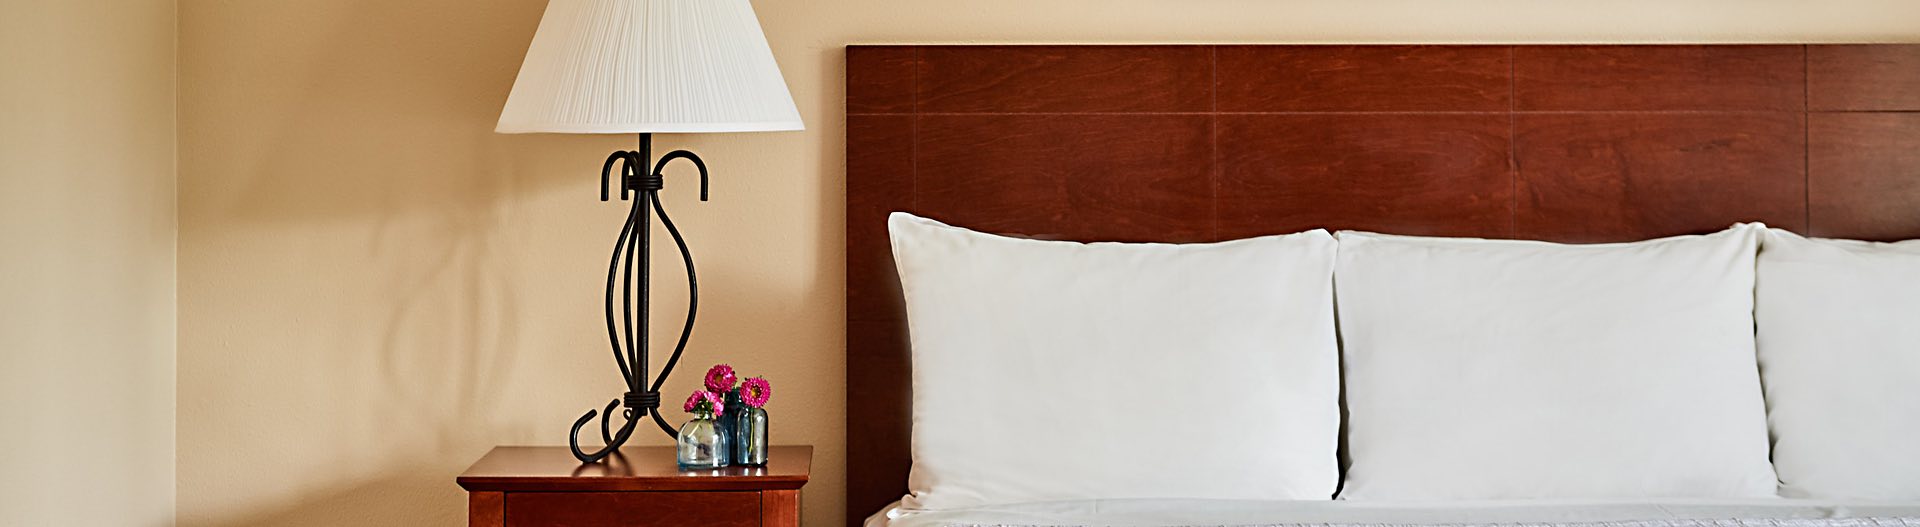 hotel bed with nightstand